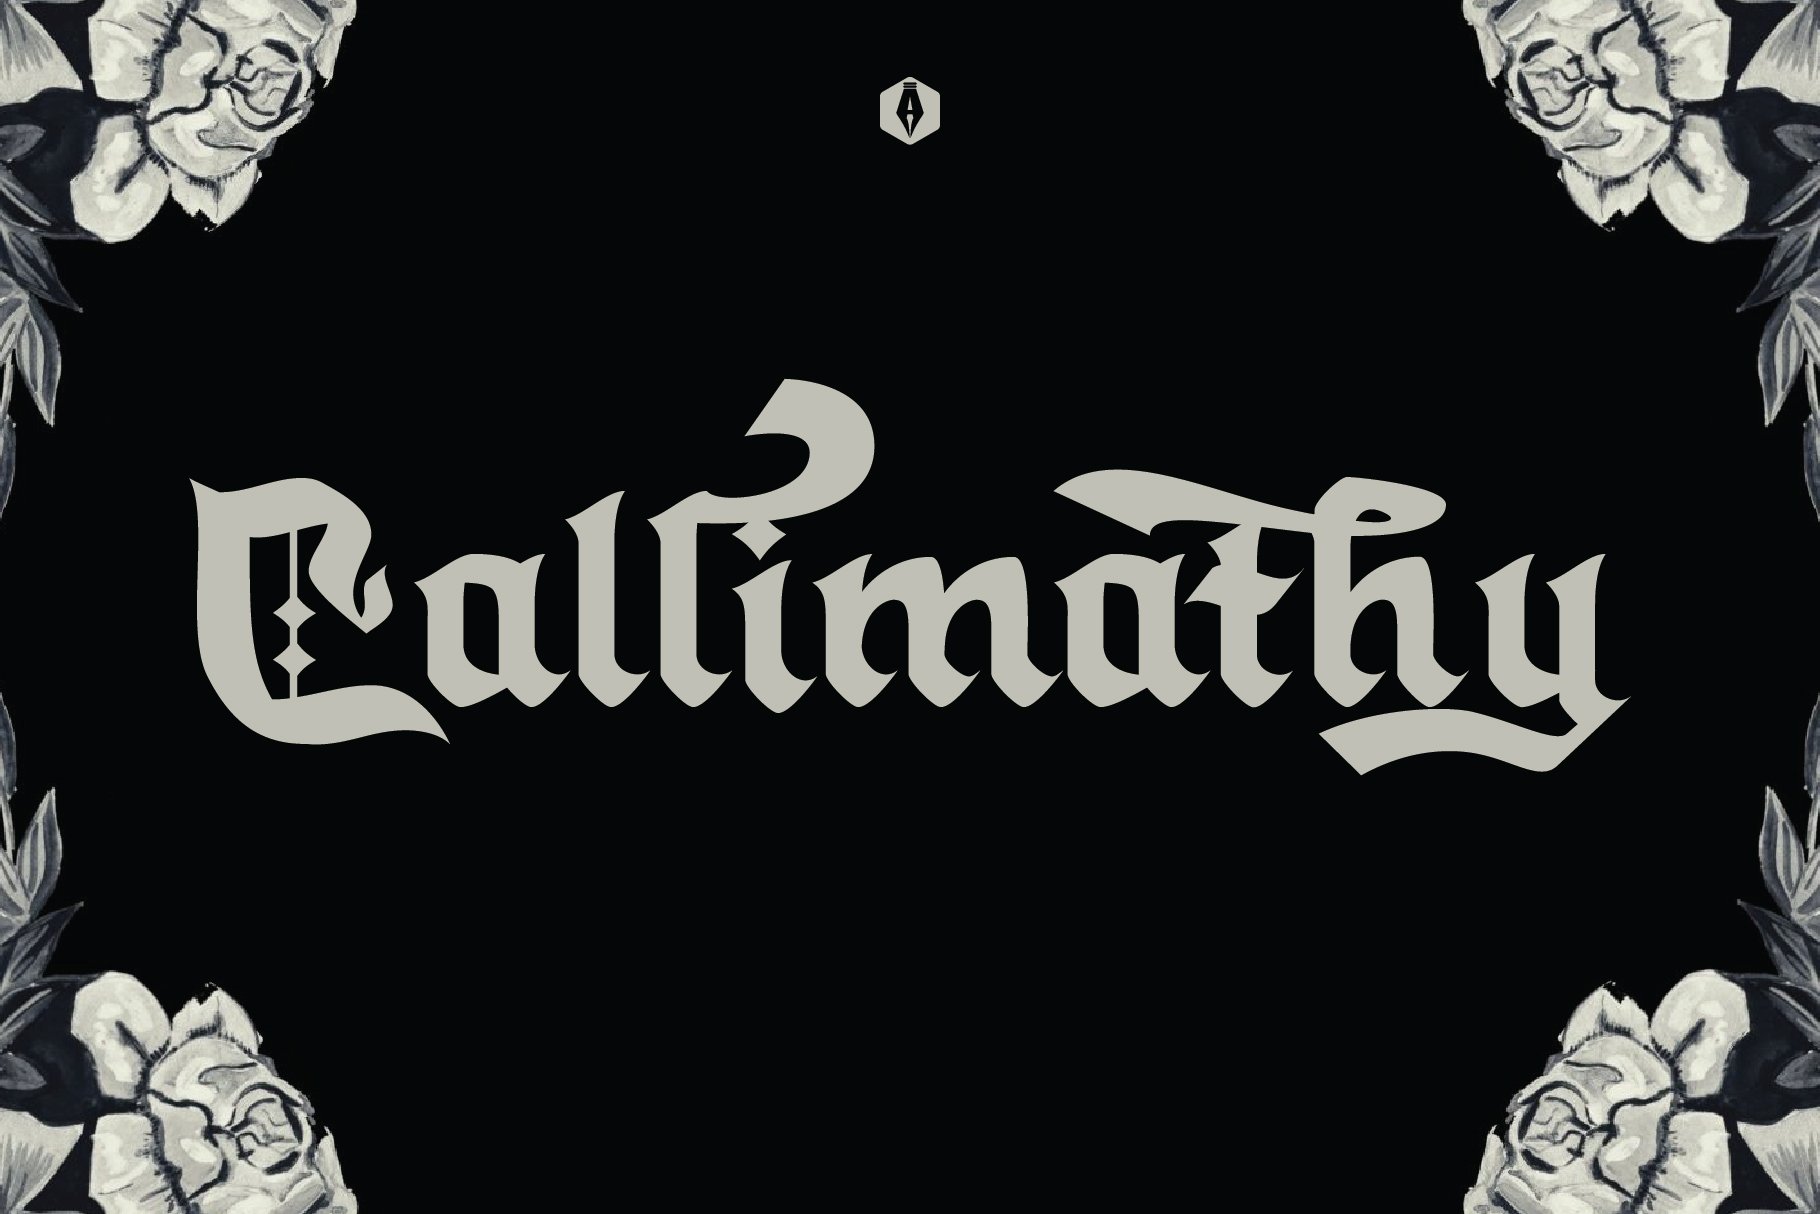 Callimathy - Gothic Blackletter cover image.